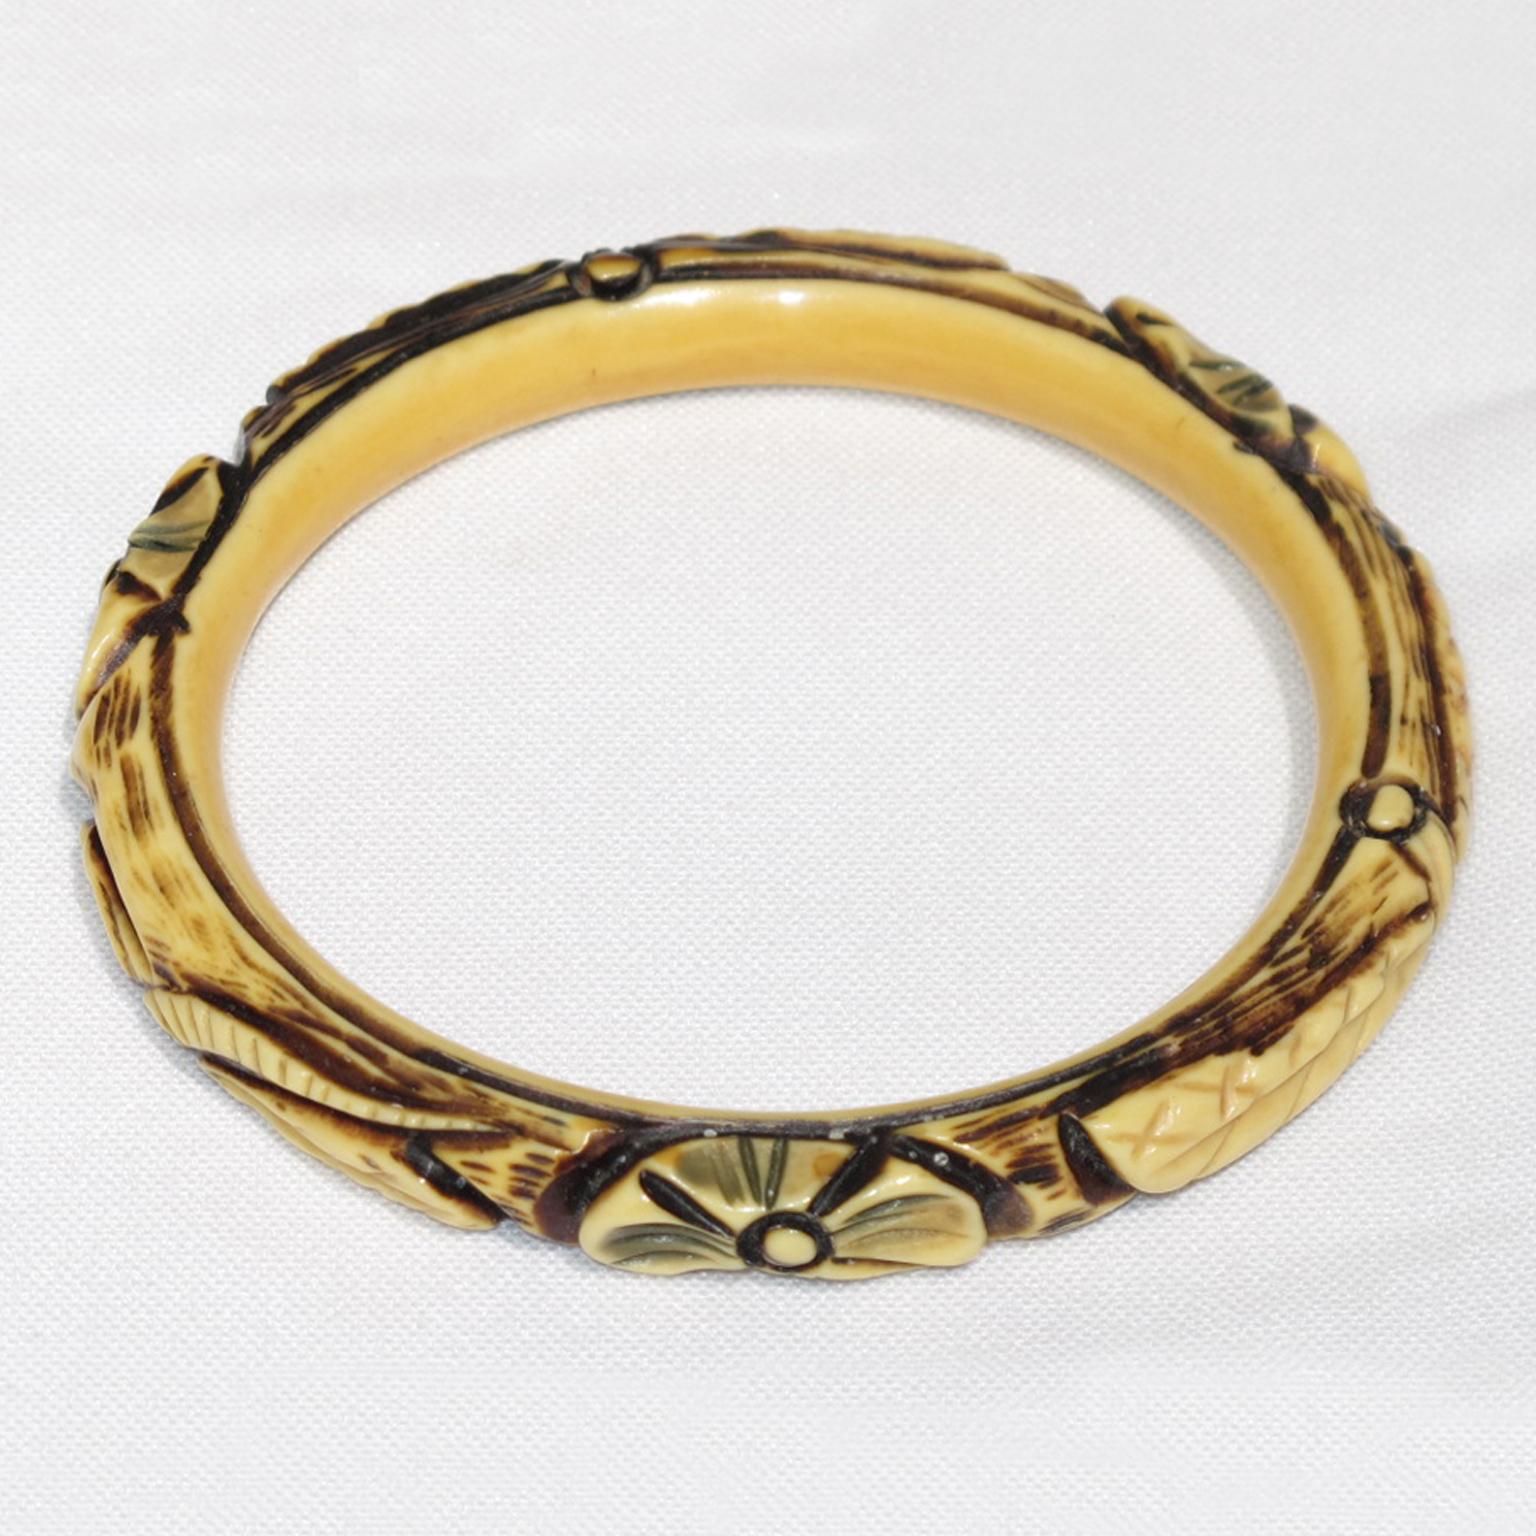 This gorgeous 1925 Art Deco celluloid bracelet bangle features a floral and geometric intricate shape, with three motifs all around the bracelet, complemented with deep carved, painted, and stained designs with a lovely range of off-white, black,